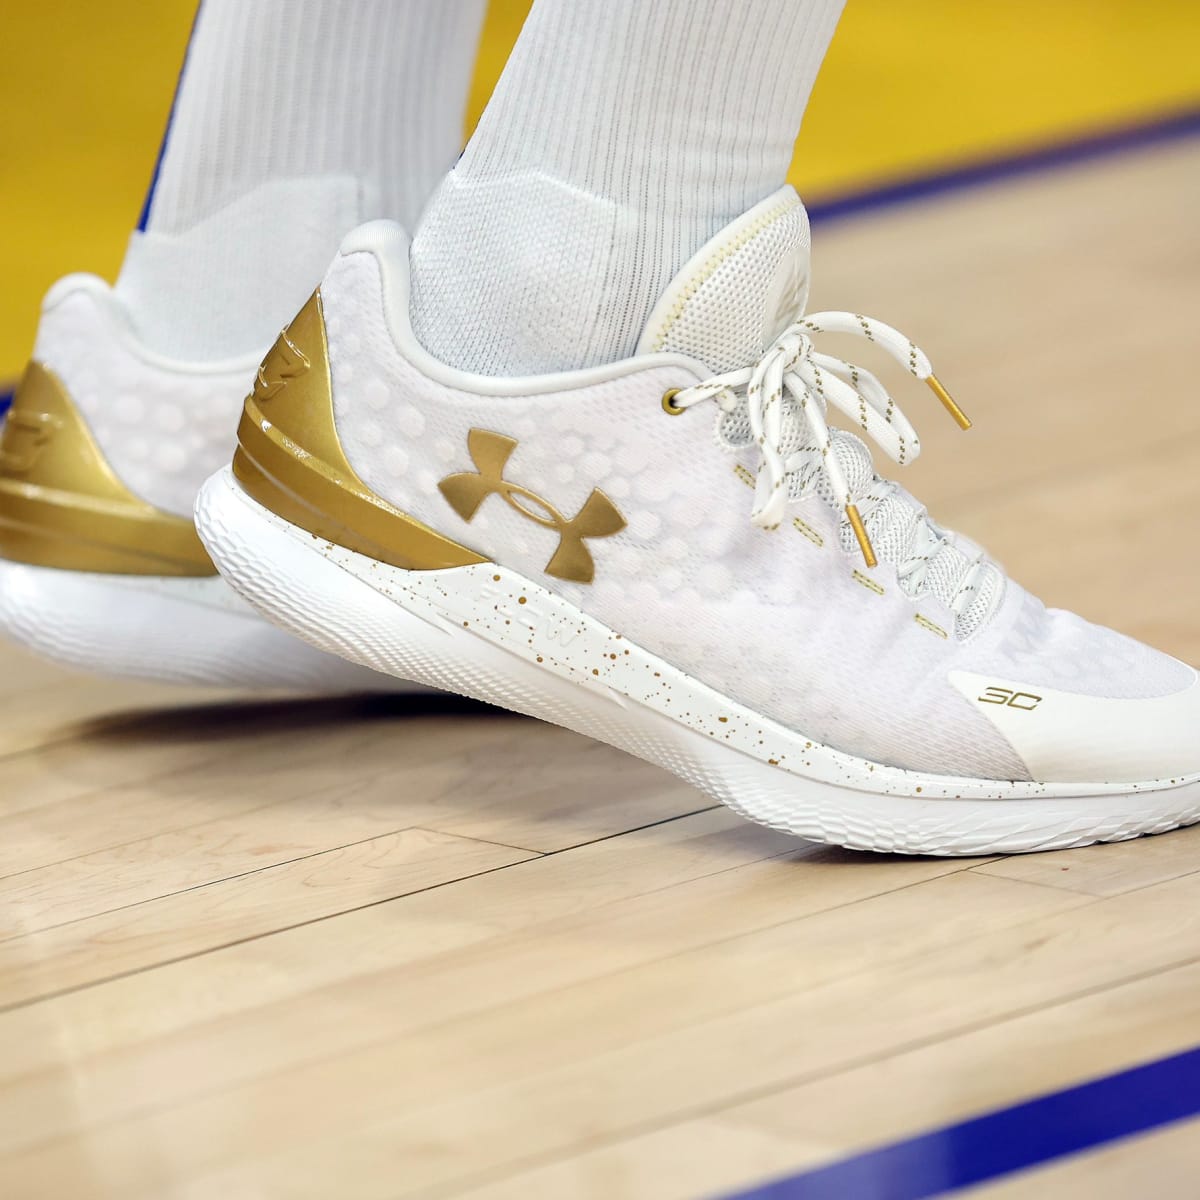 Stephen Curry's New Flow Shoe! Under Armour Curry 1 Low FLOTRO